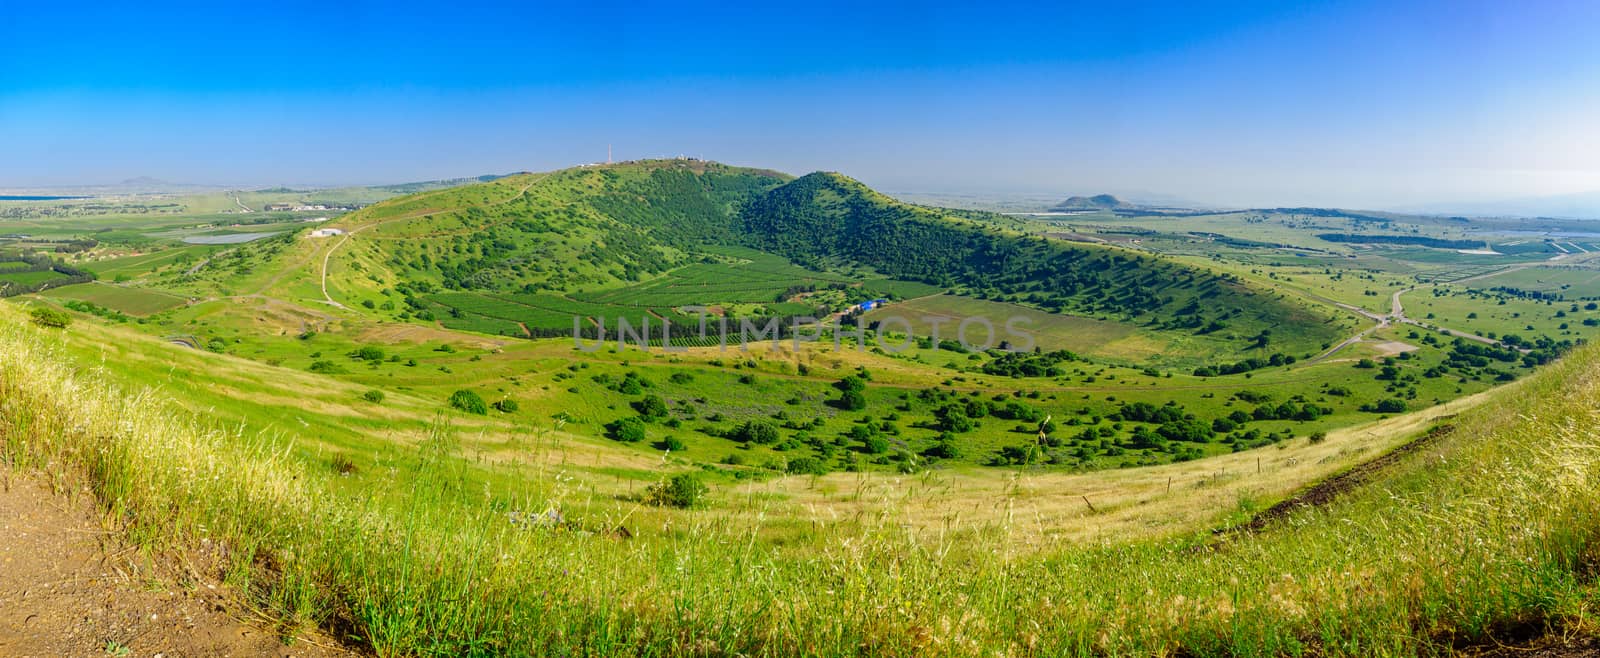 Panoramic view of the Golan Heights landscape from Mount Bental by RnDmS